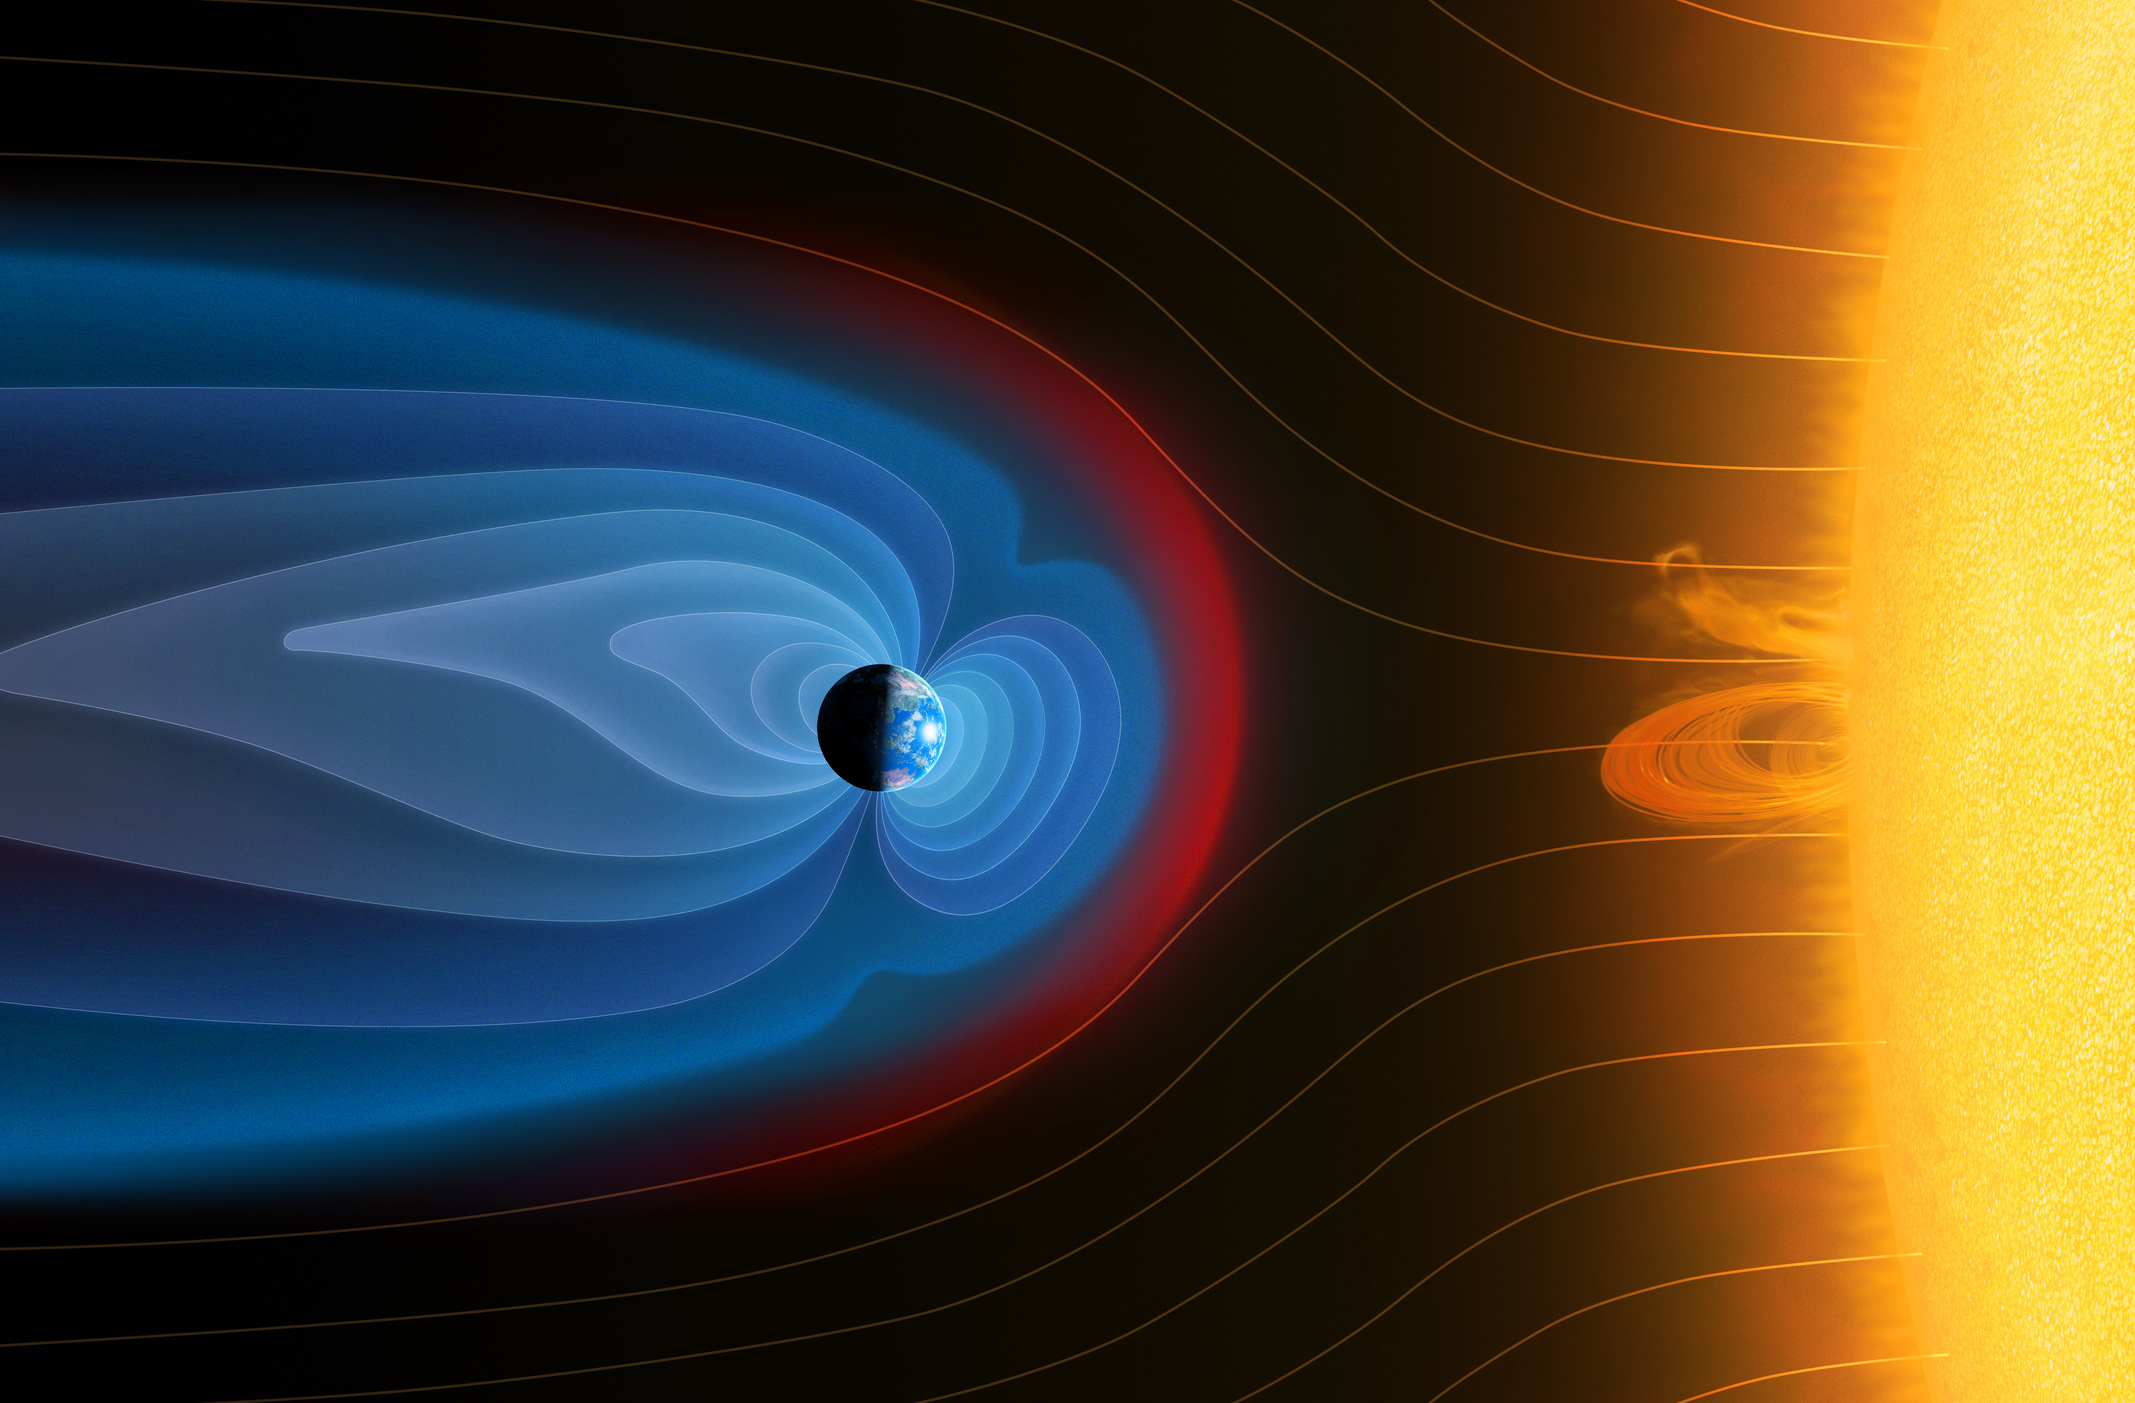 wavy blue lines surround earth, repelling red lines that represent solar wind streaming from the sun